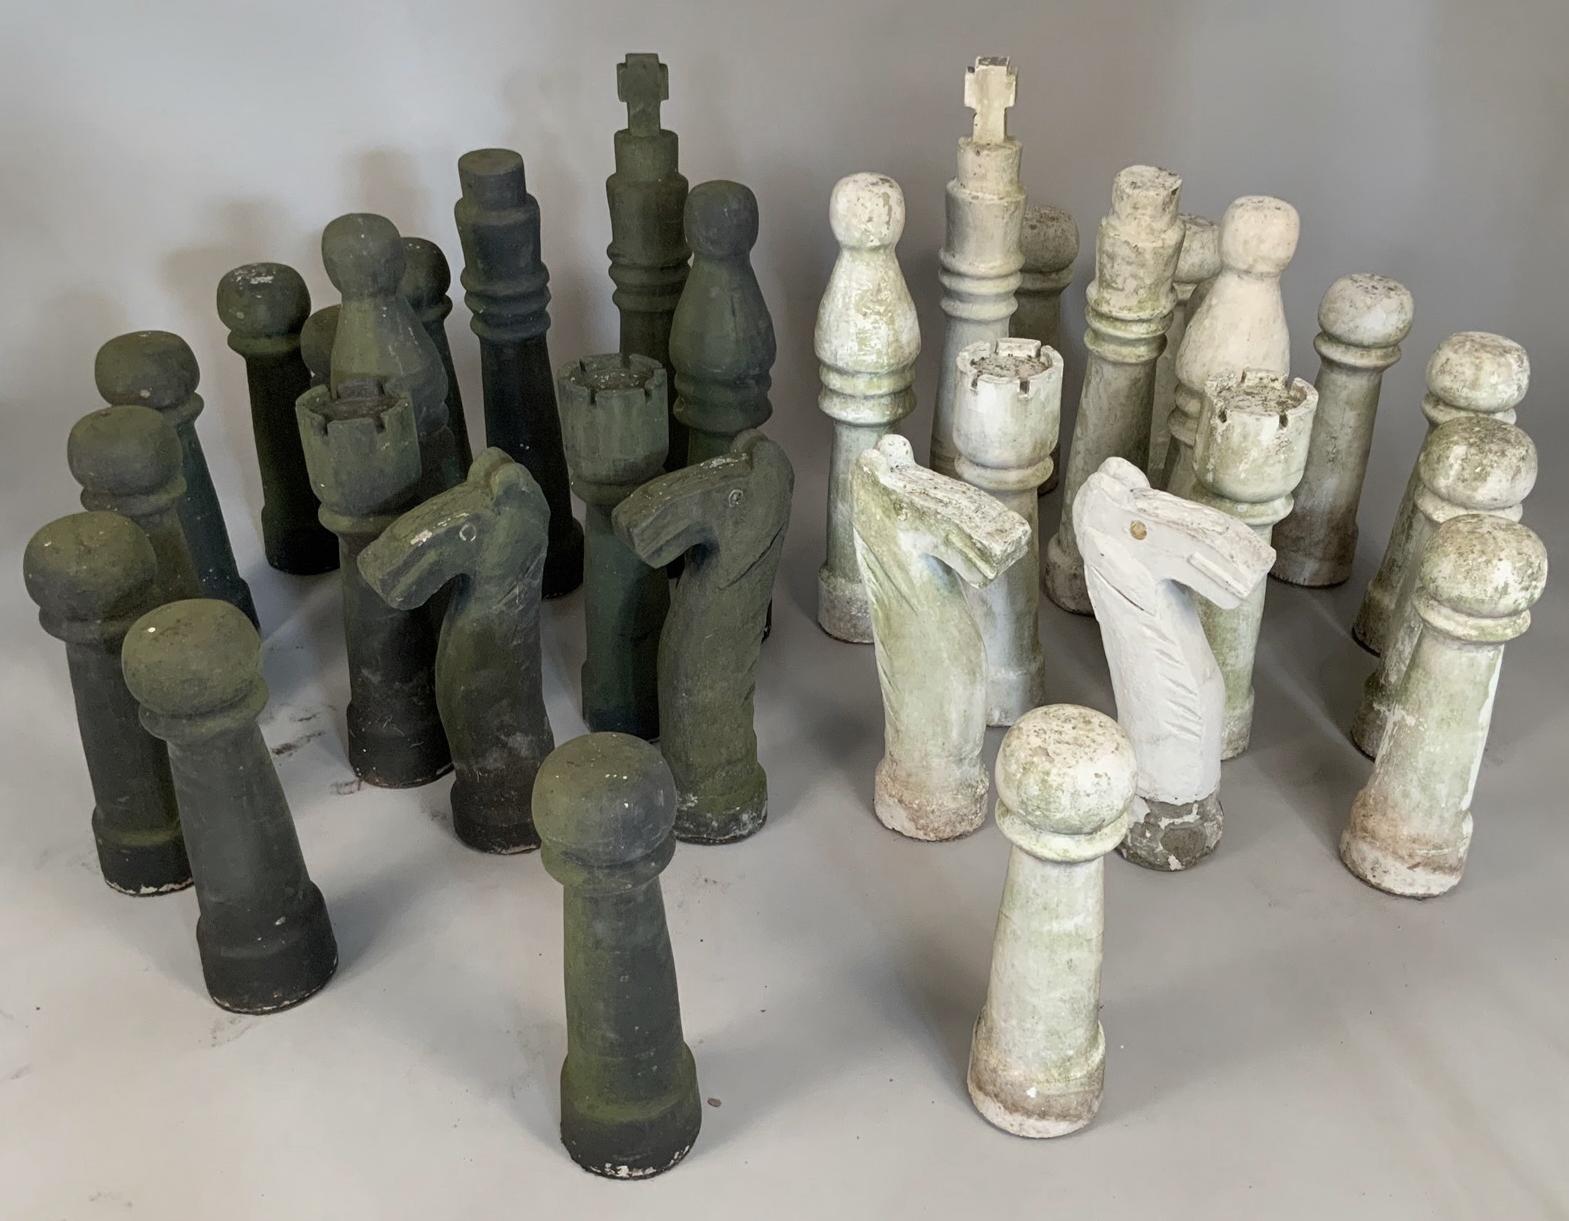 A very impressive large scale cast concrete chess set, complete with 36 pieces, half black and half white. In their original finish with aged patina.